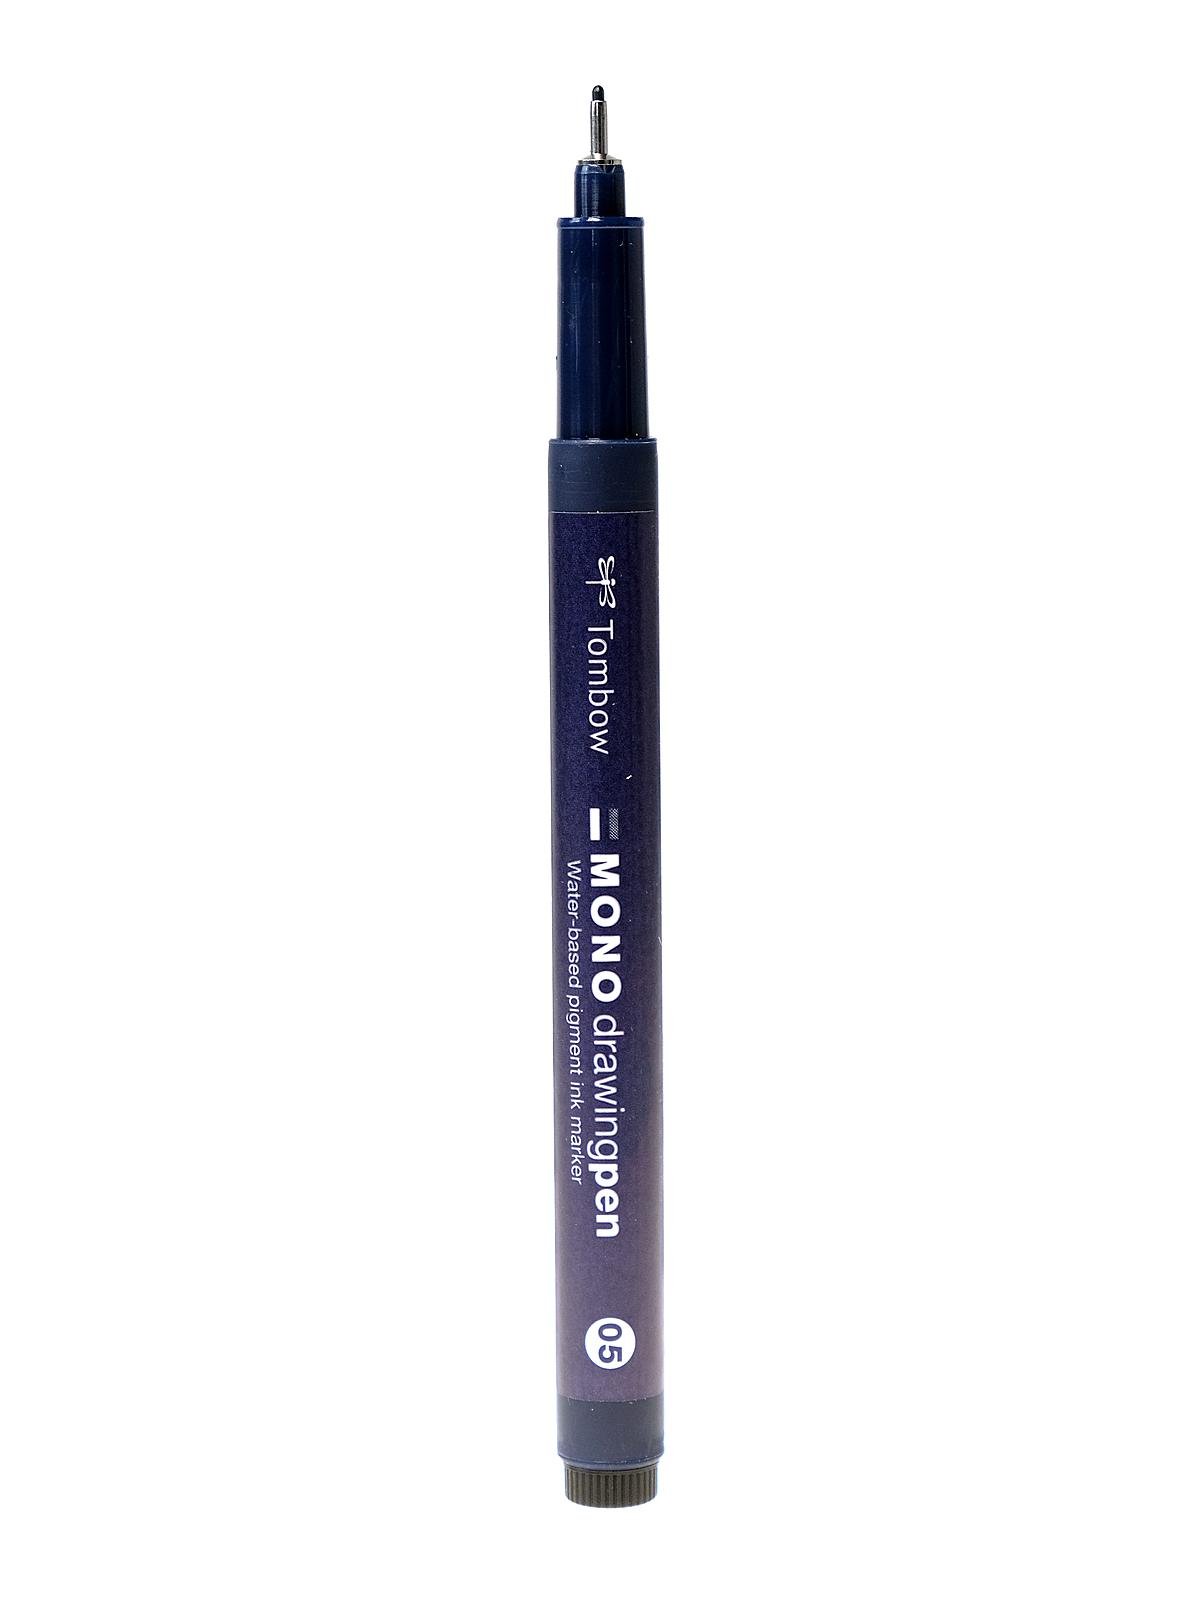 Tombow Mono 01 Waterproof Pigment Ink Pen (0.1mm tip size) for